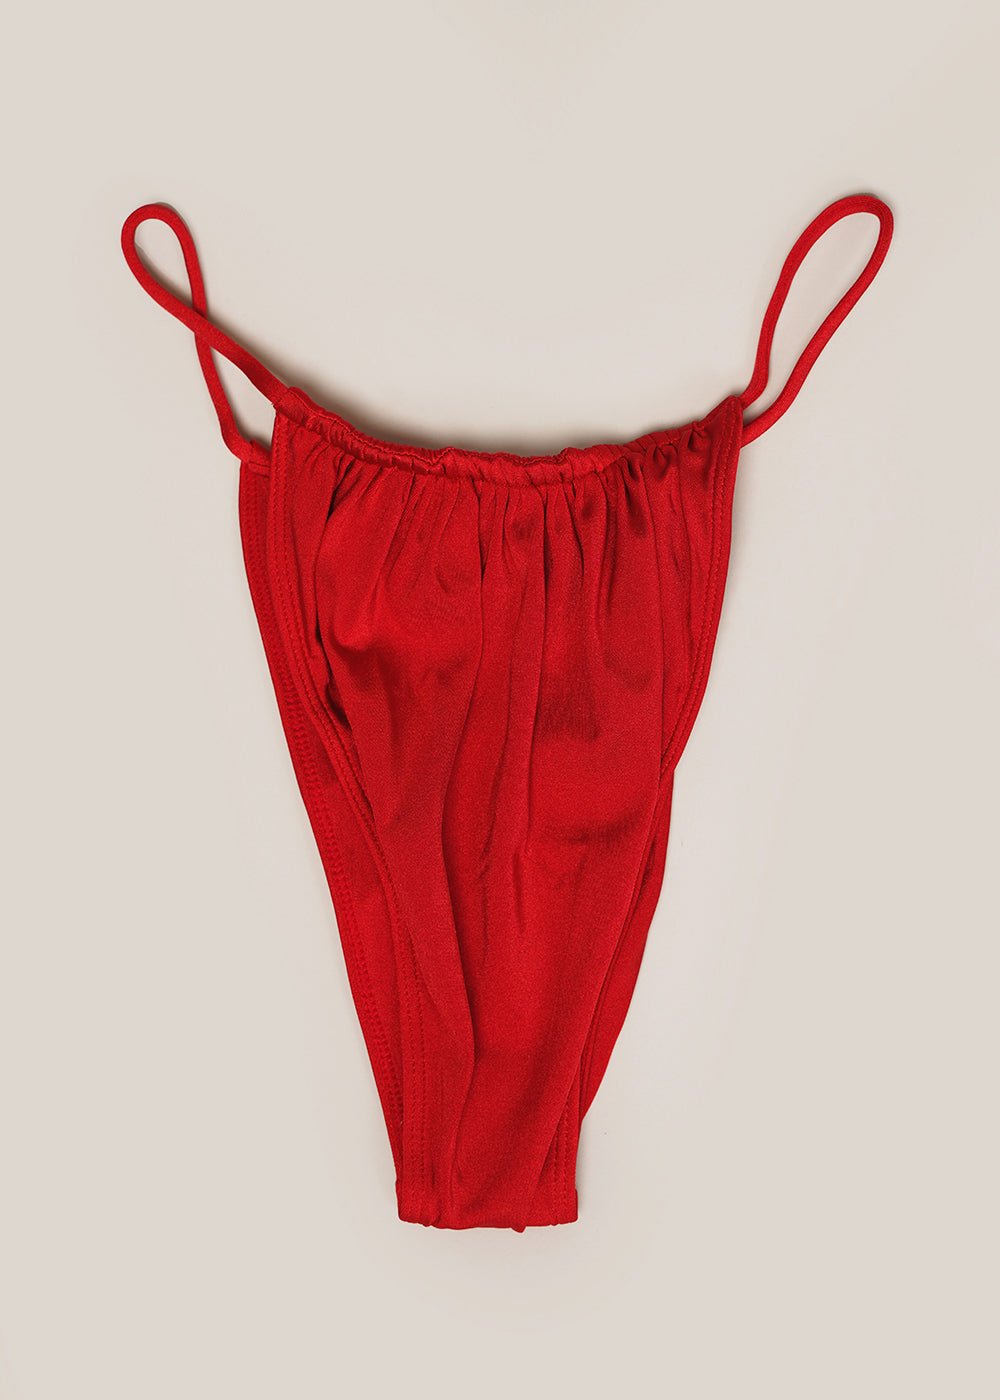 Belle The Label Red Pia Bikini Bottom - New Classics Studios Sustainable Ethical Fashion Canada